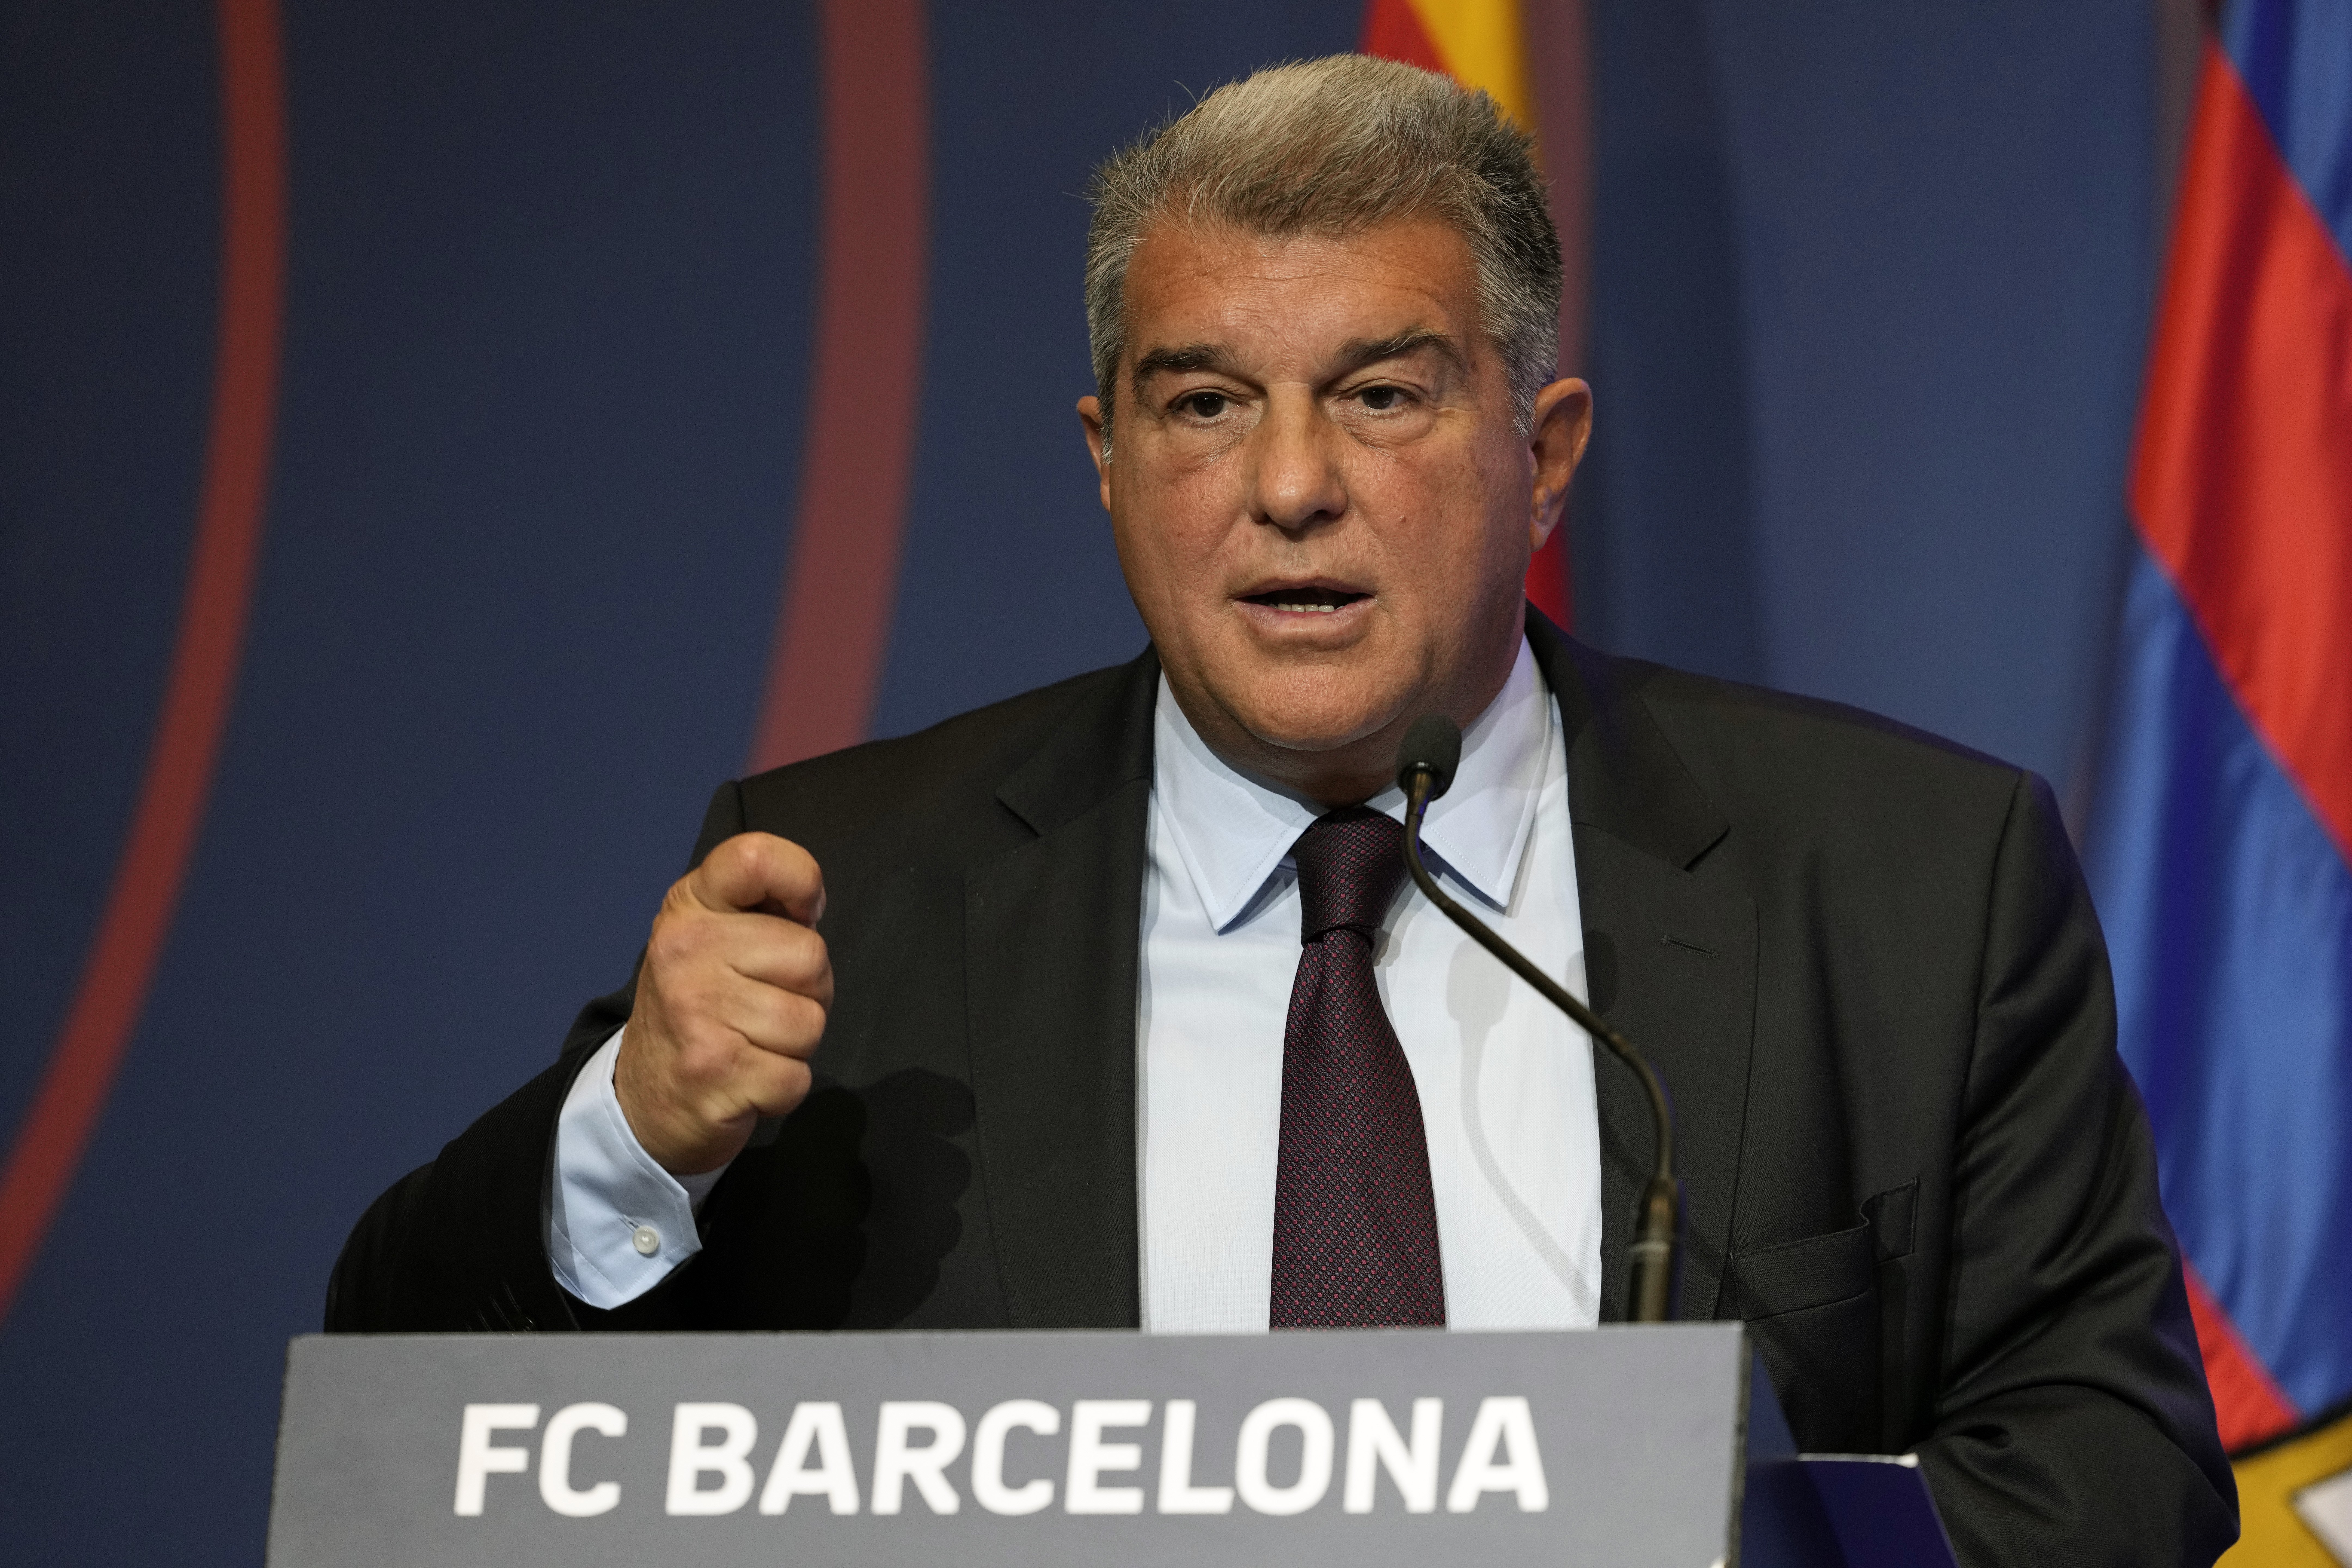 Laporta: "The Negreira payments were for normal sports advisory services, and all transparent"